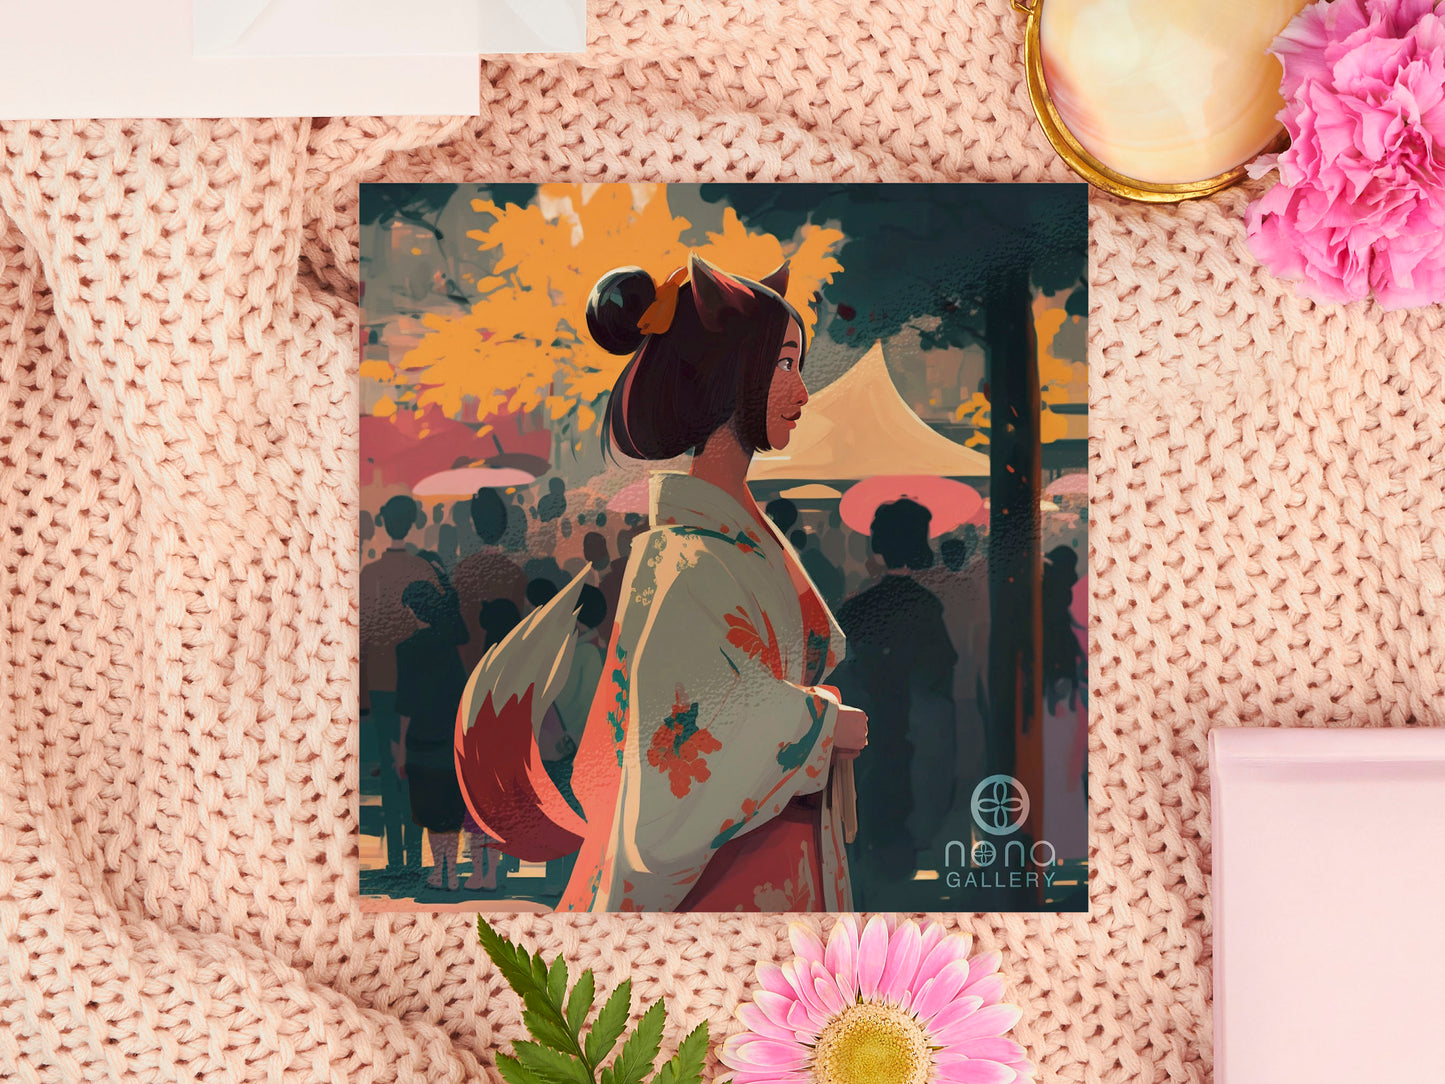 Digital Illustration Art Print of Japanese kitsune fox spirit girl at a Festival wearing a  Kimono with fox tail and ears showing